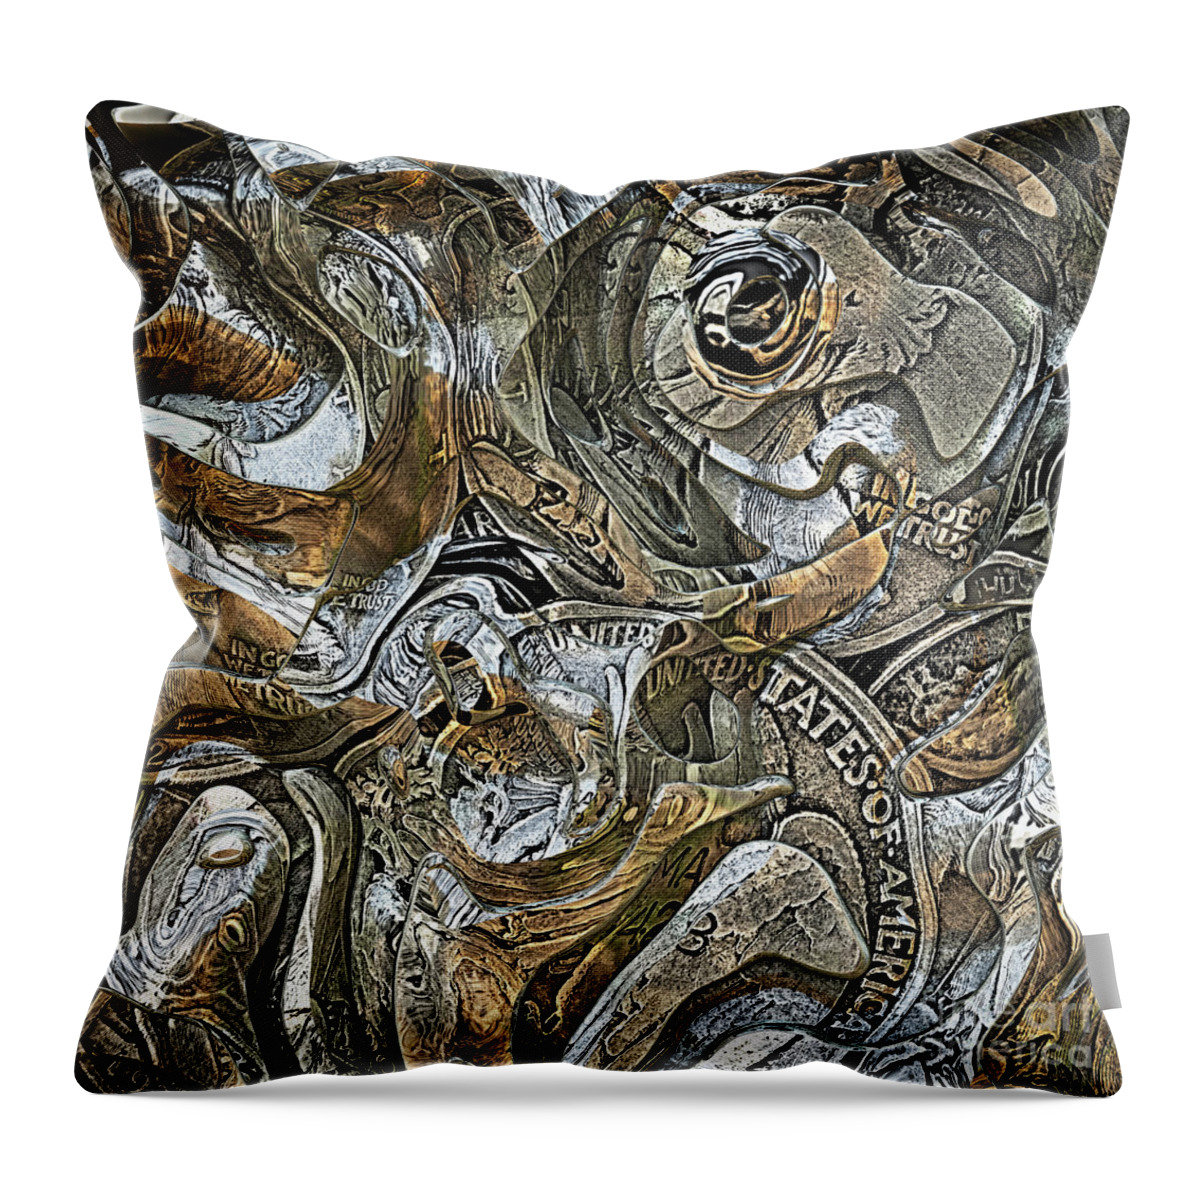 Coins Throw Pillow featuring the digital art Abstract Old Coins by Phil Perkins